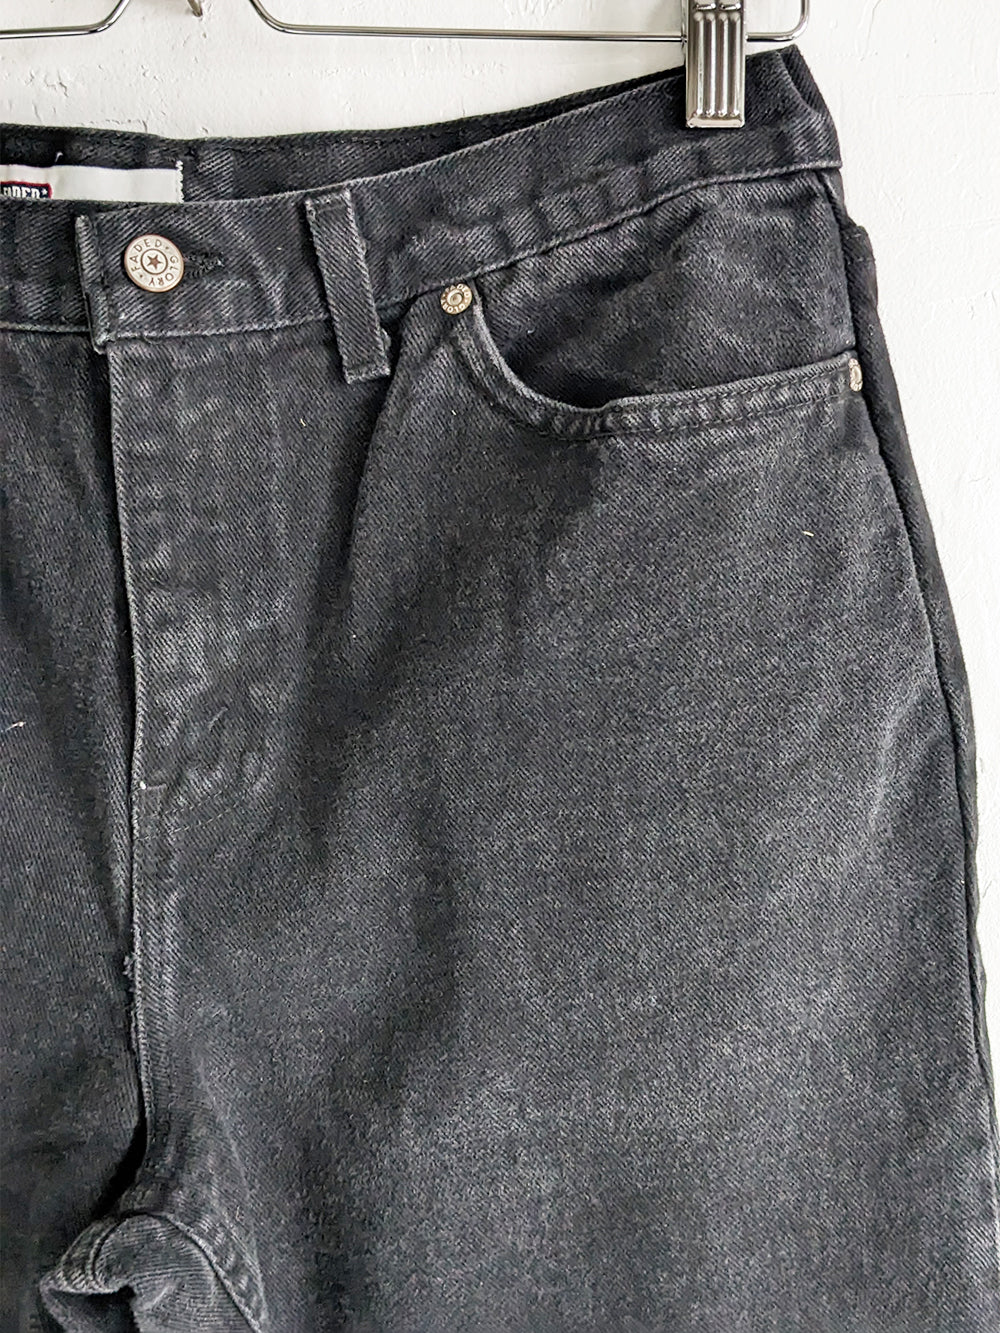 Faded Glory Black Jeans Size 16 - 44% off